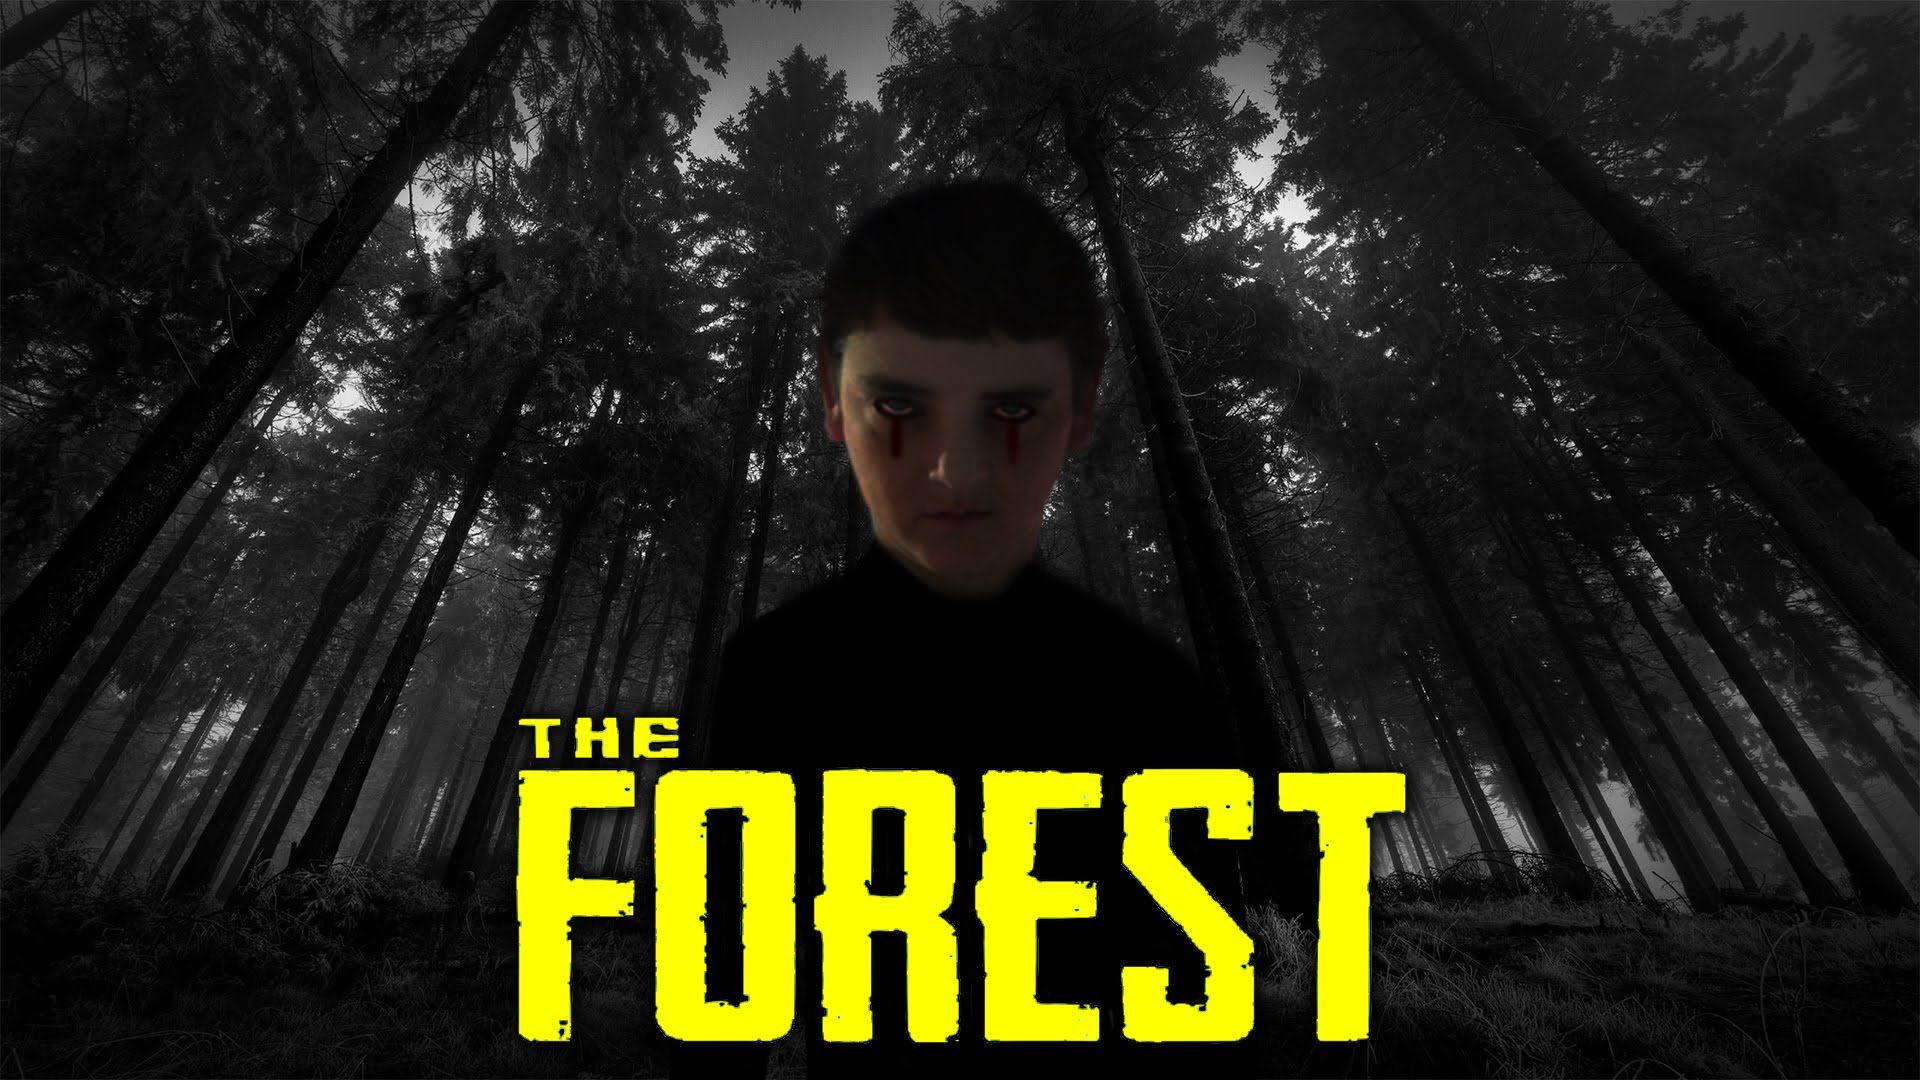 son of the forest game